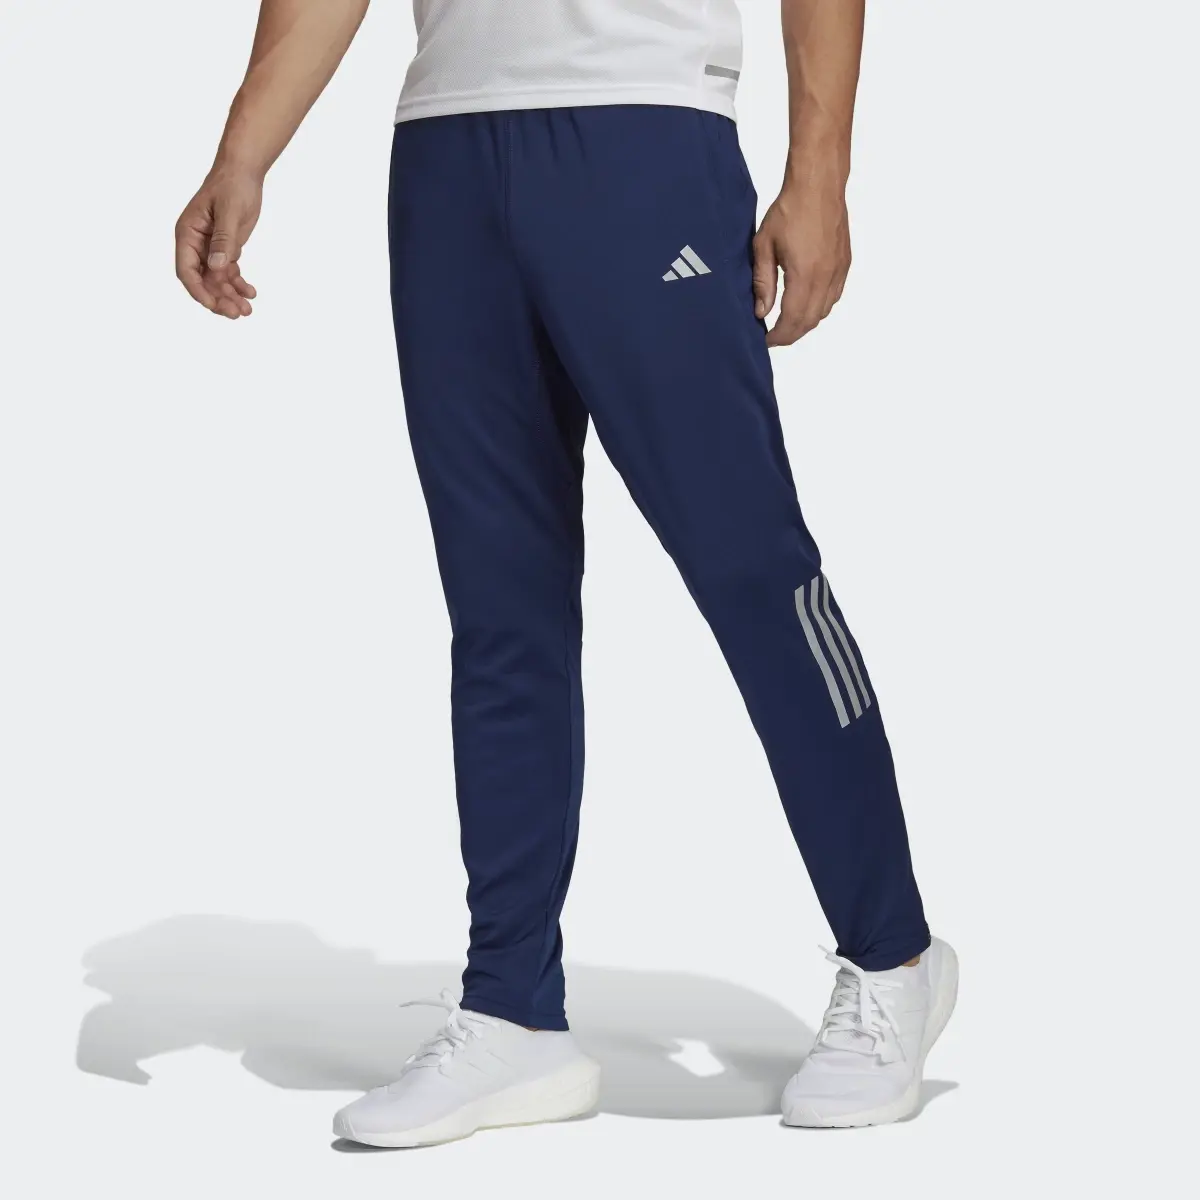 Adidas Own the Run Astro Knit Pants. 1